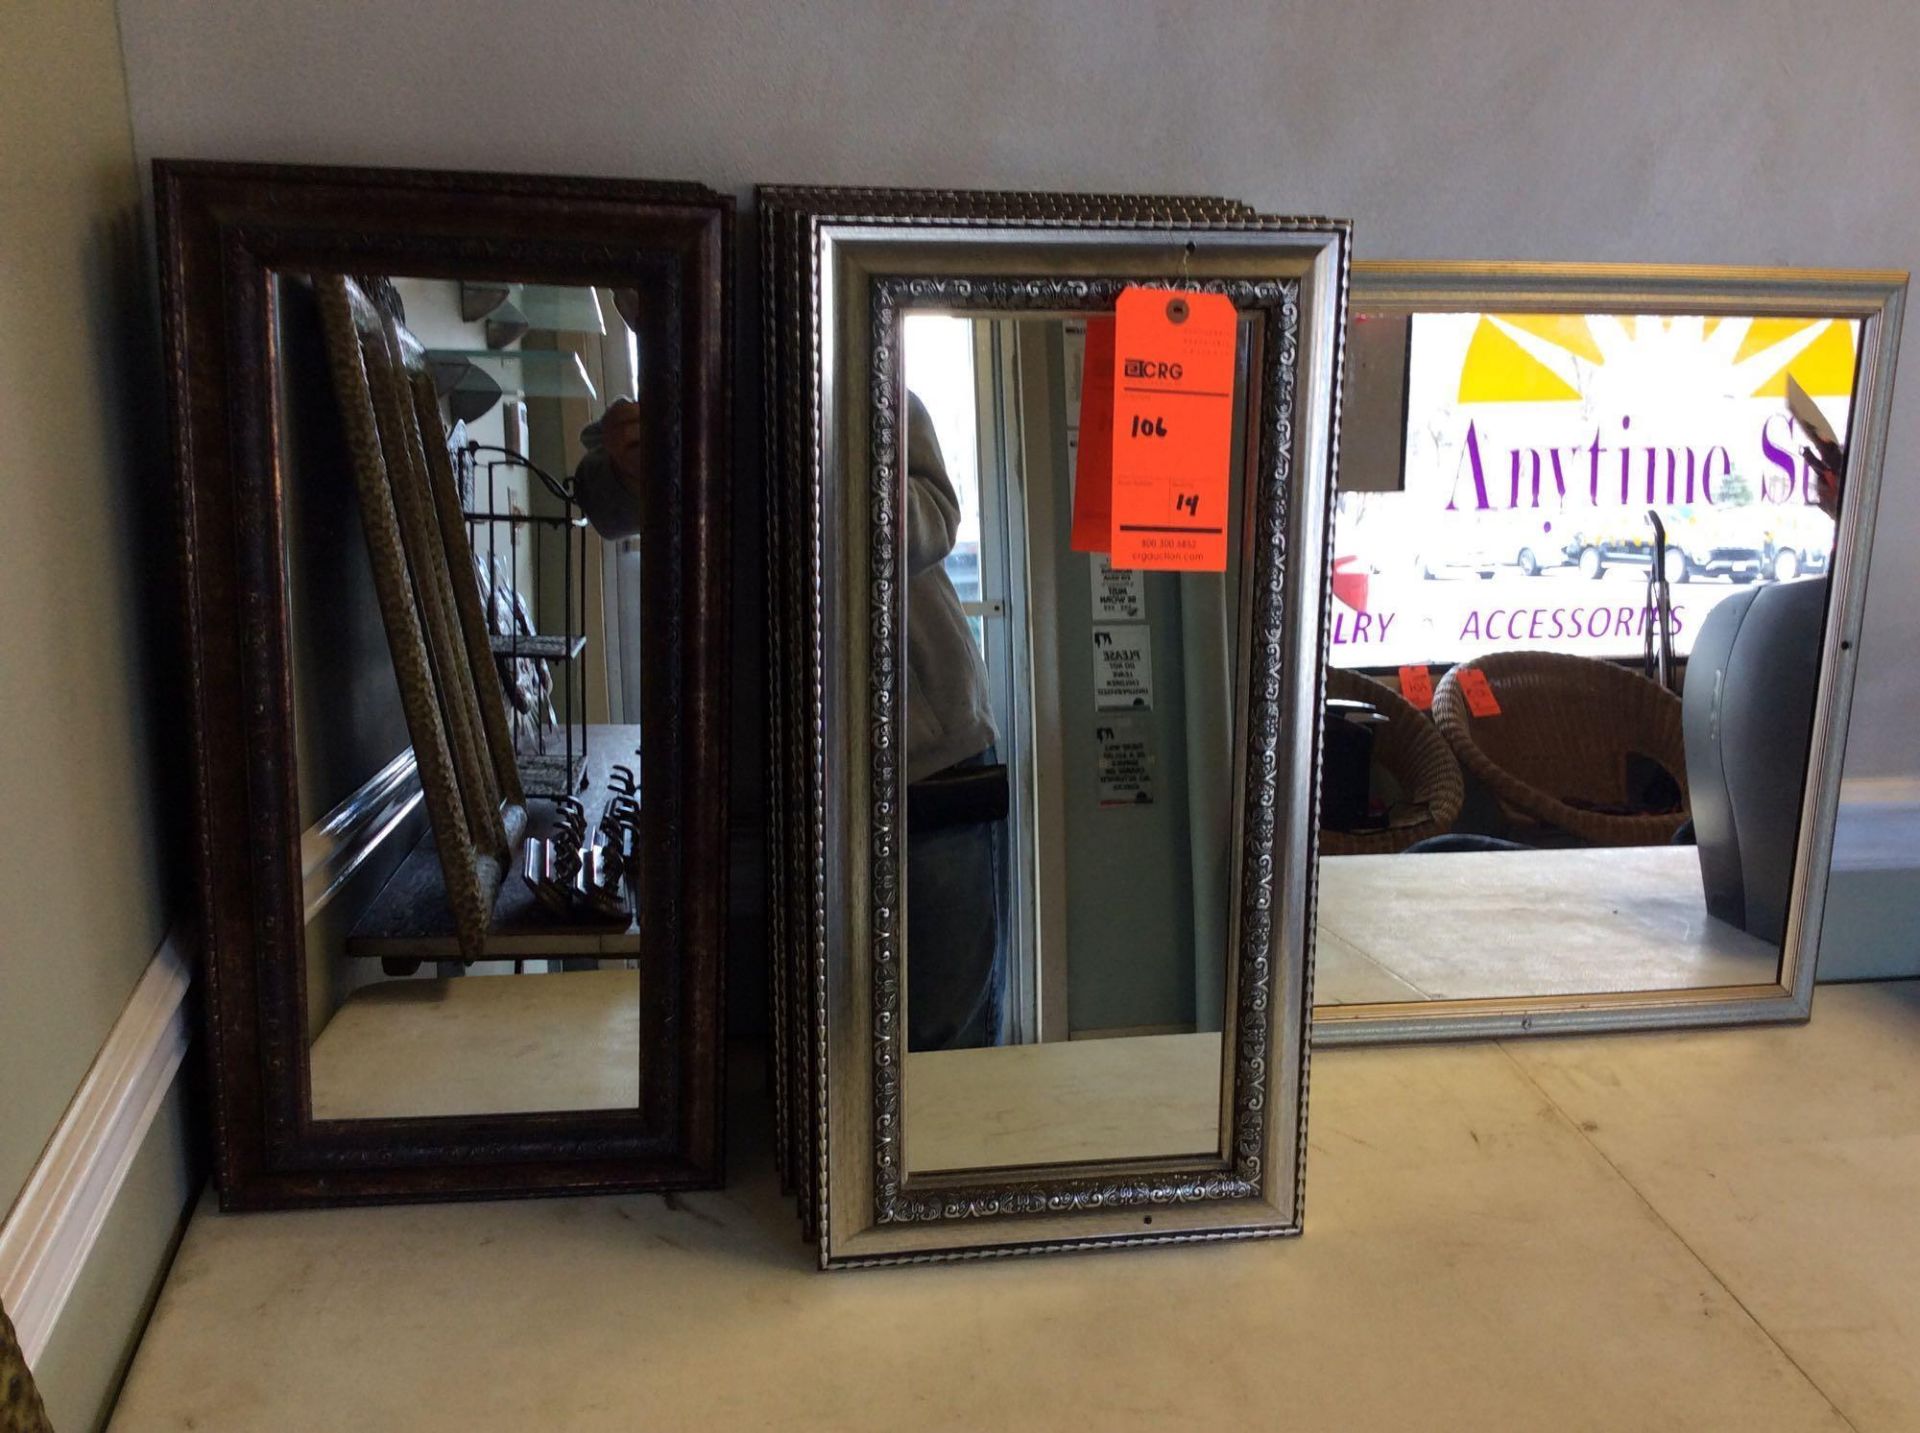 Lot of asst mirrors - most aprox 12" x 24"